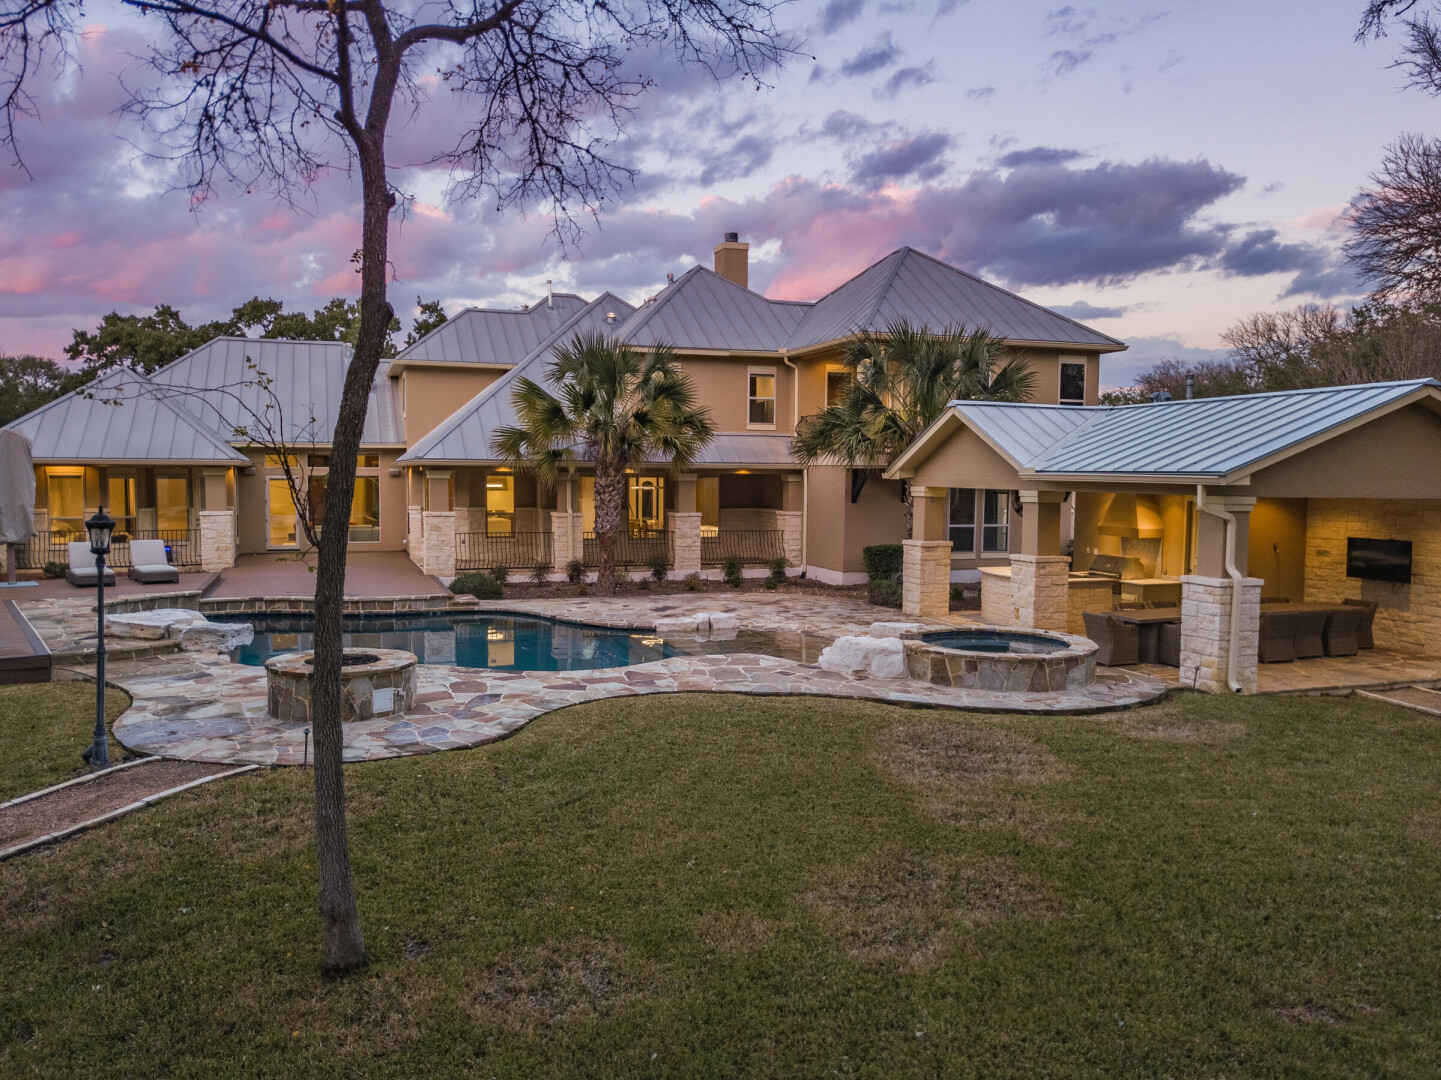 Rear view of a transitional custom home at sunset, San Antonio TX